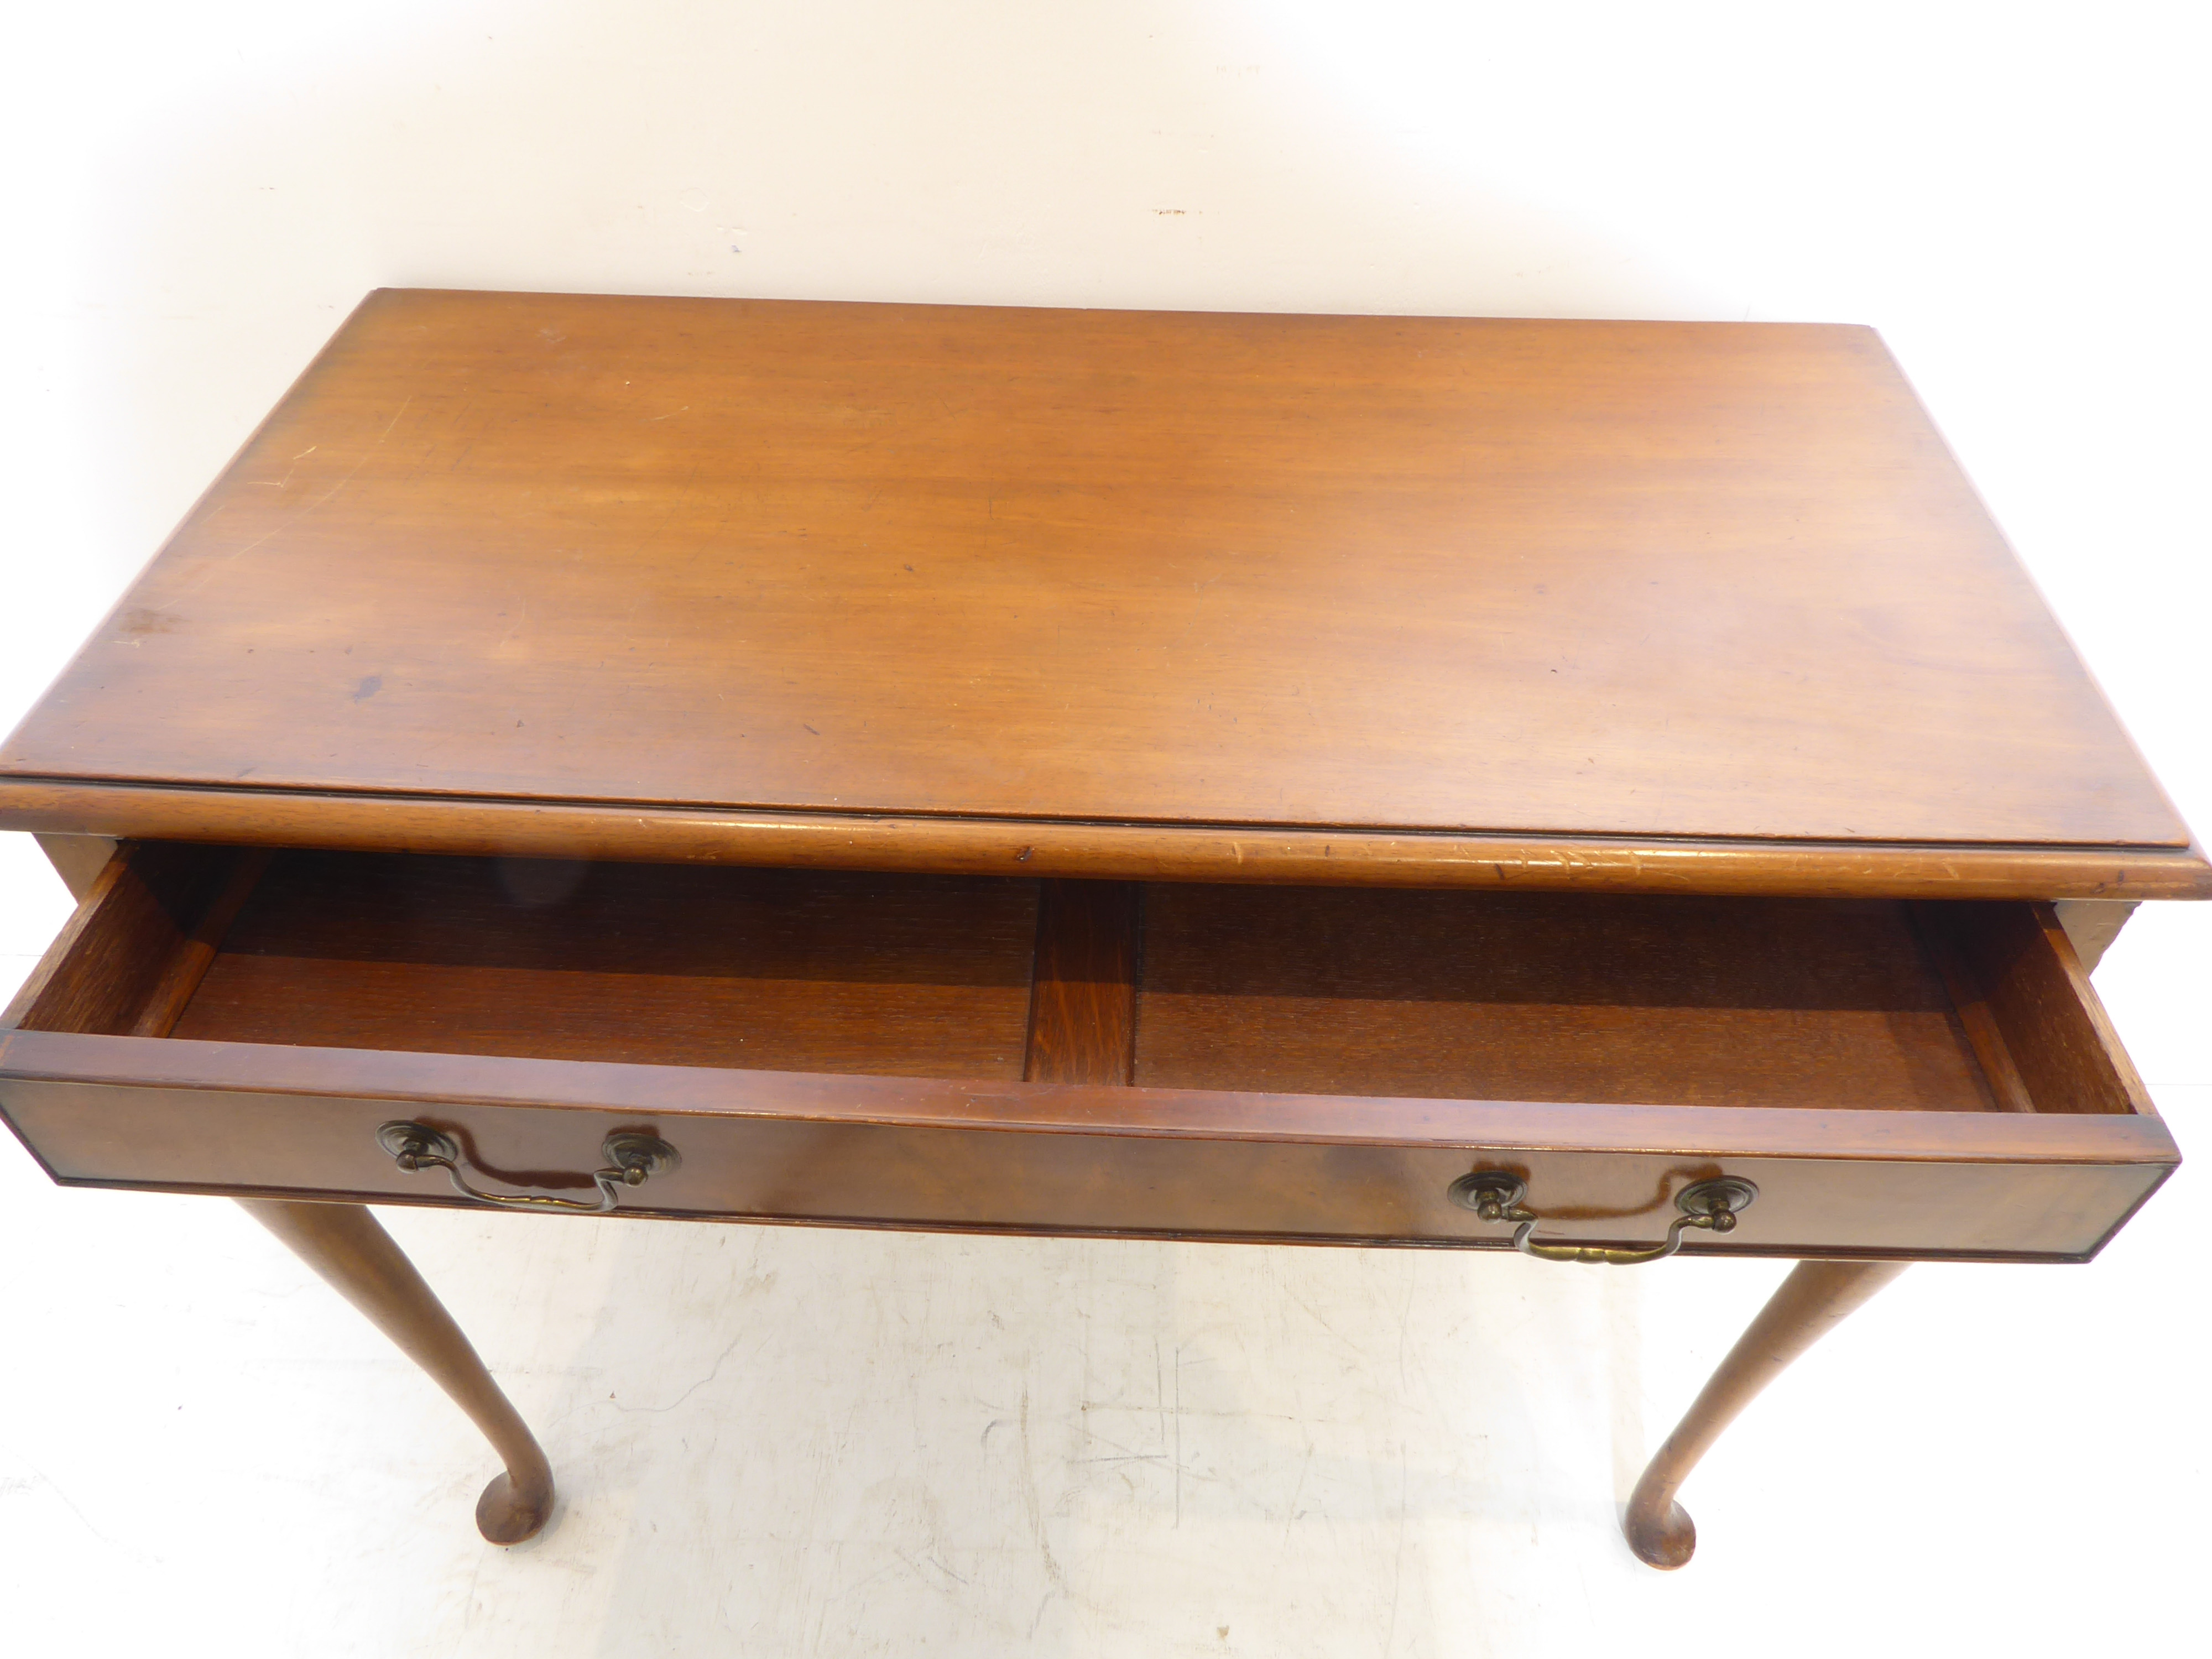 An early 20th century mahogany side table in Georgian-style – the thumbnail moulded top above a - Image 3 of 4